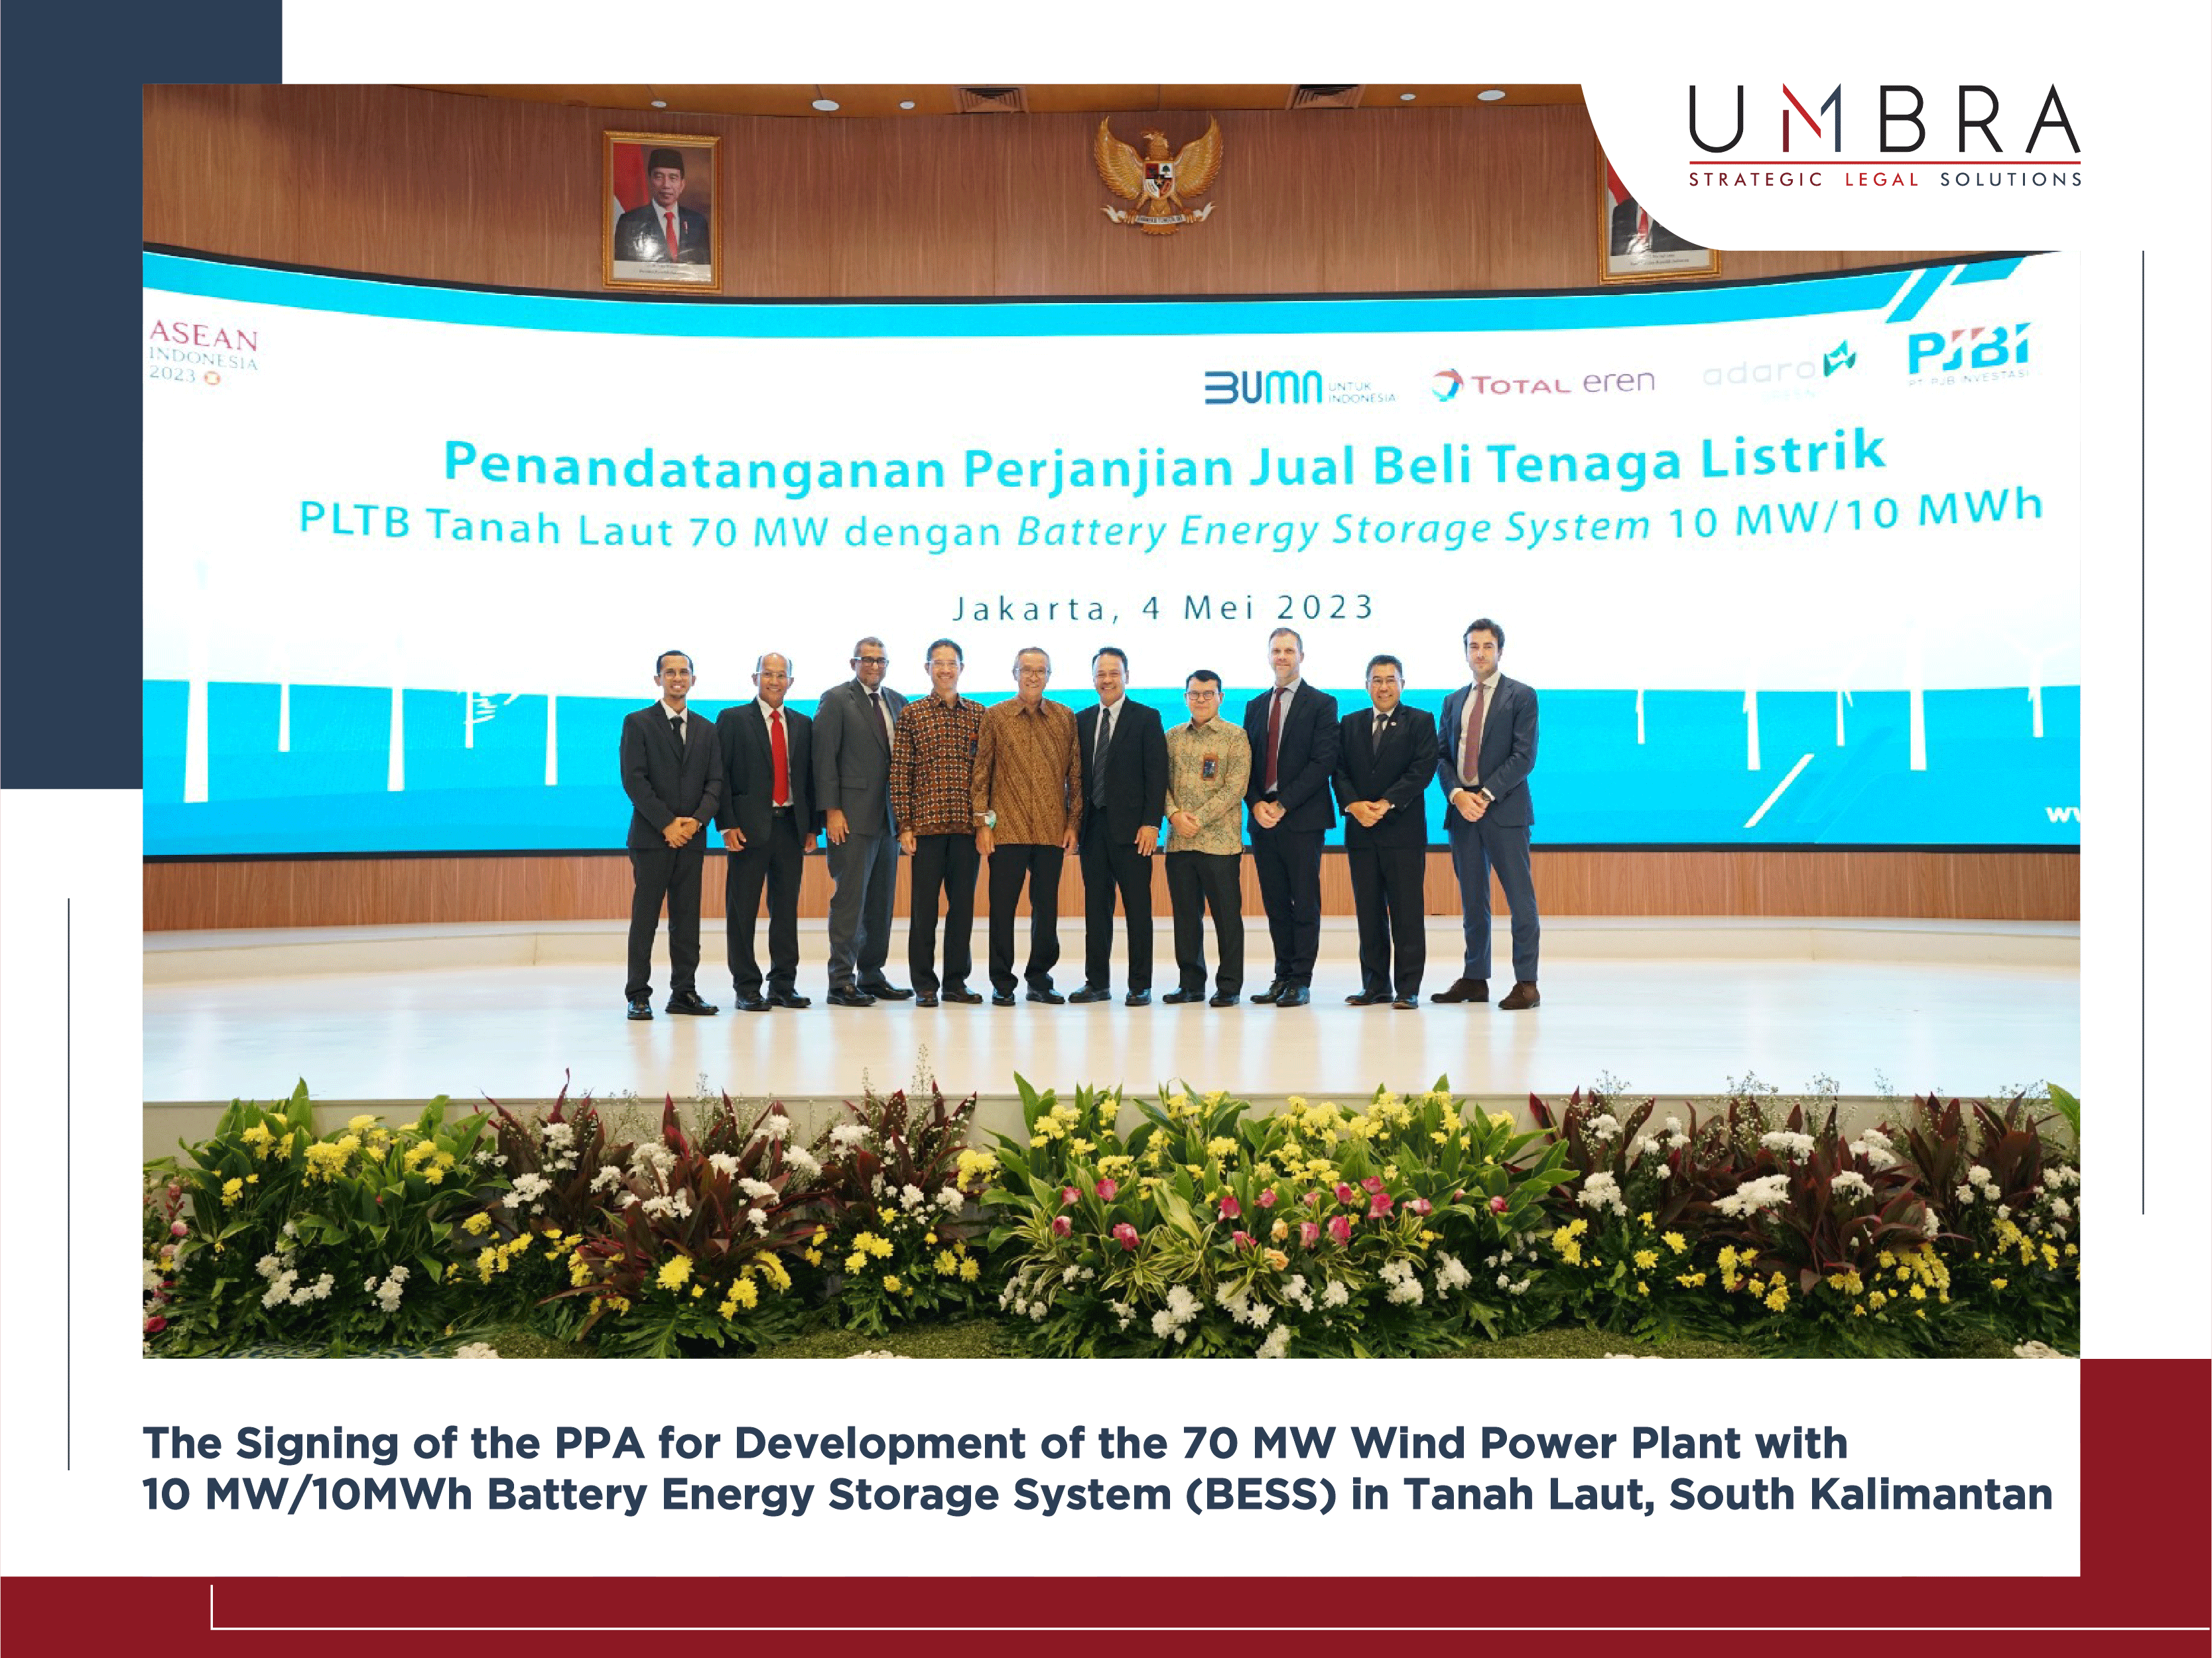 The Signing of the PPA for Development of the 70 MW Wind Power Plant with 10 MW/10MWh Battery Energy Storage System (BESS) in Tanah Laut, South Kalimantan